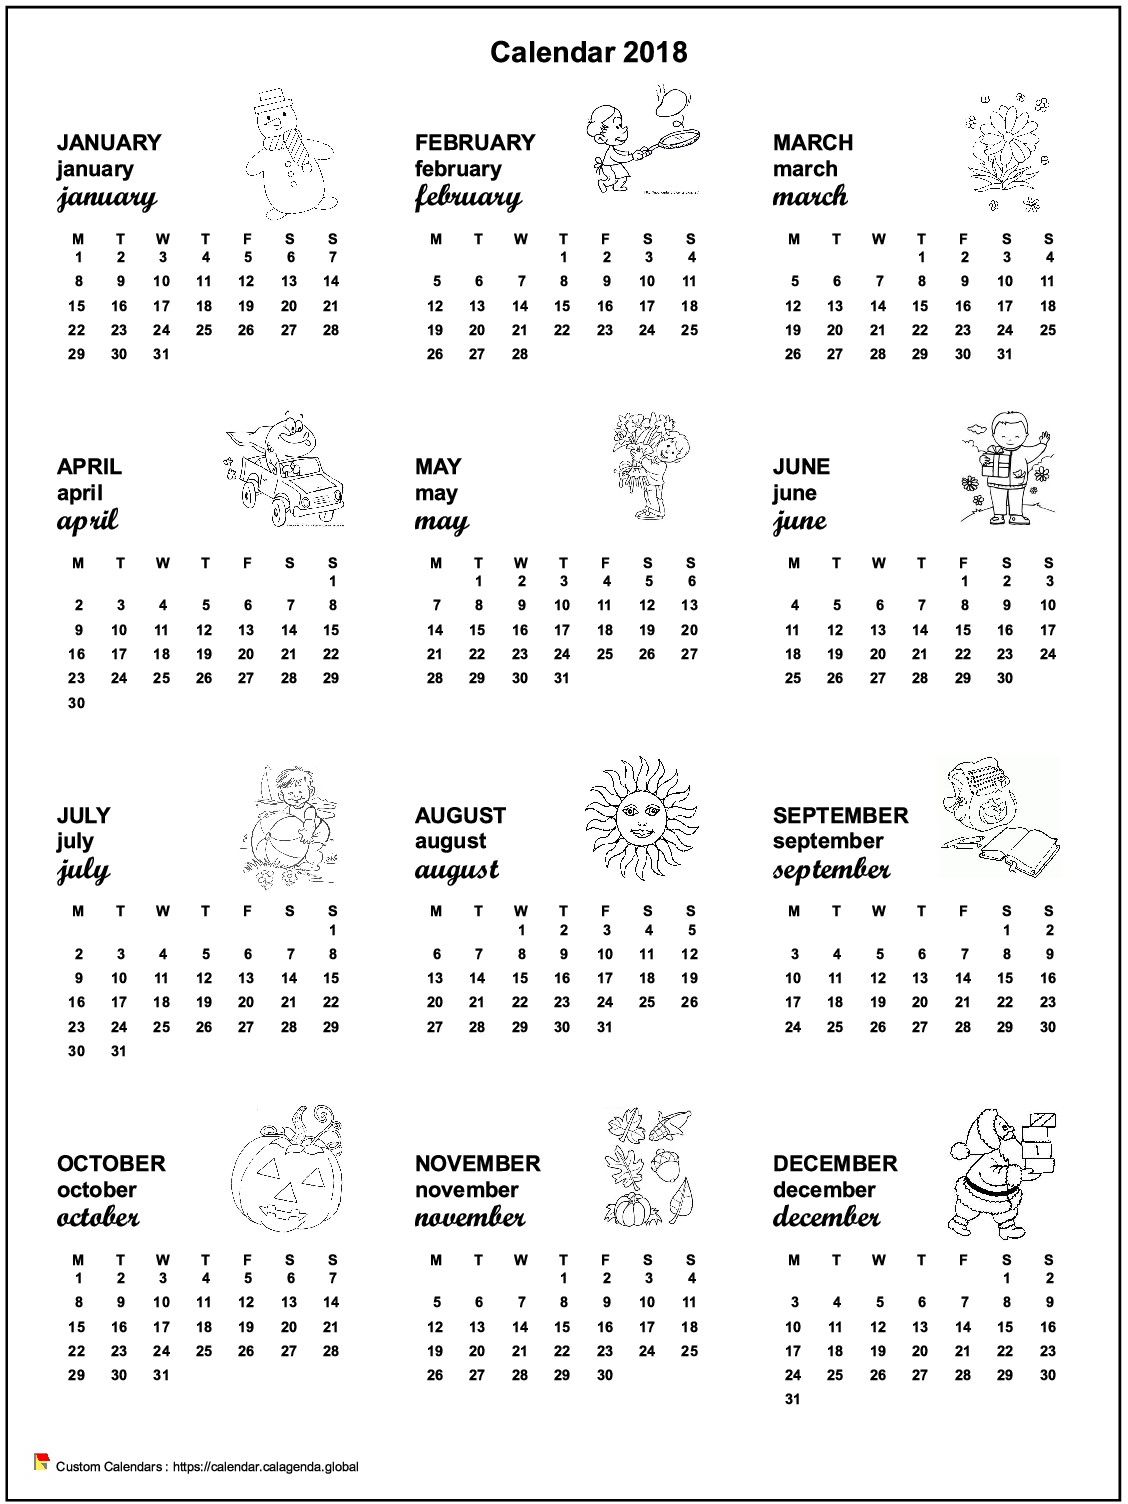 Calendar 2048 annual maternal and primary school